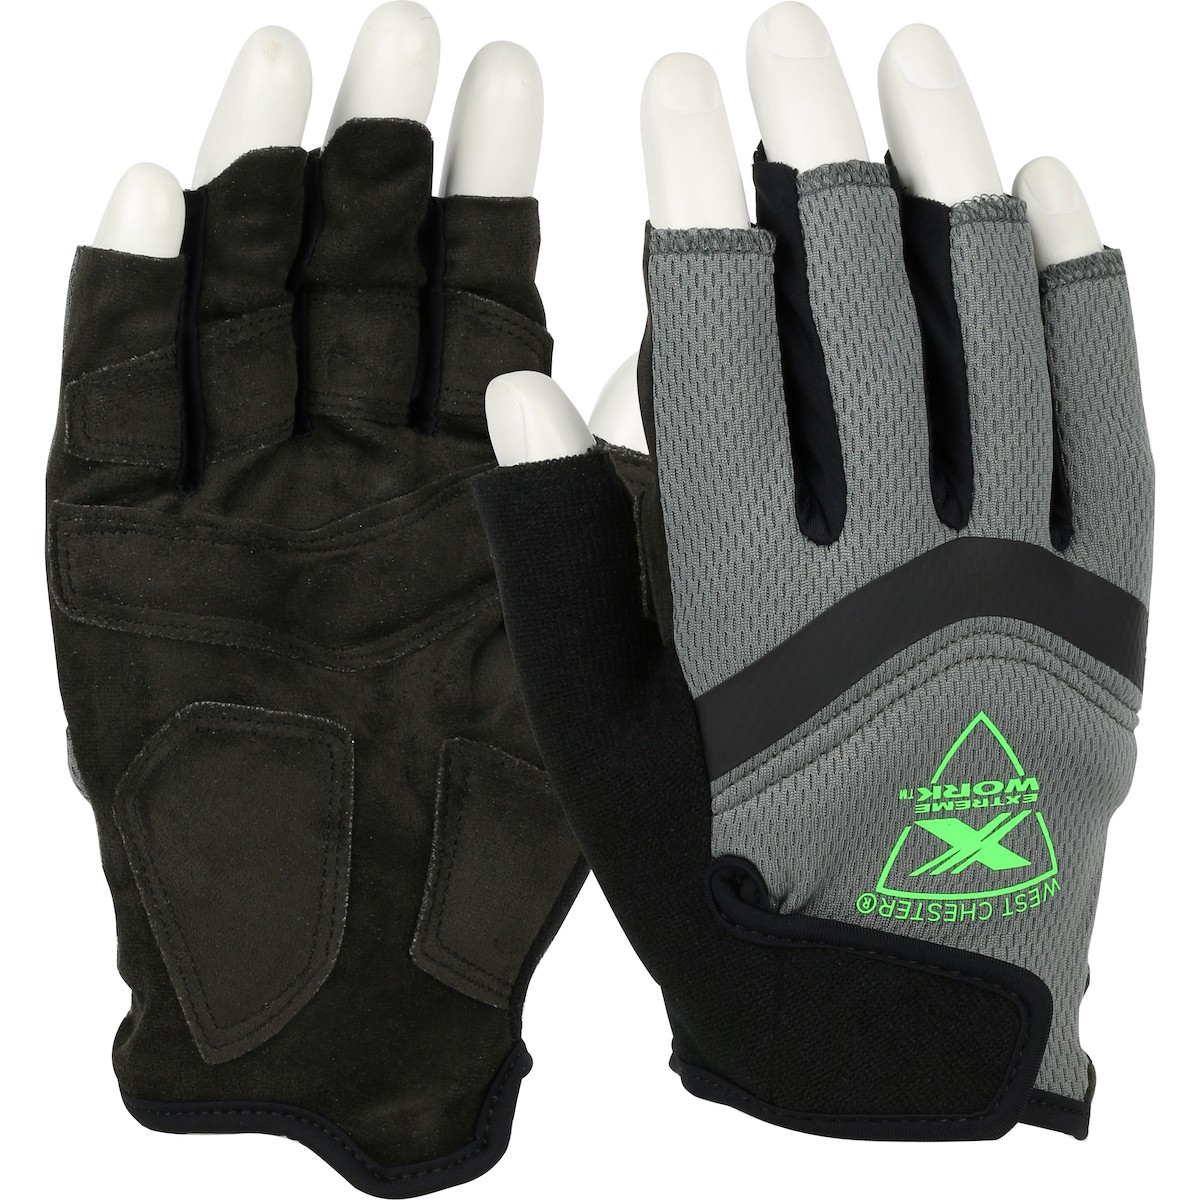 Extreme Work® 5 Dex™ ToughX Suede Padded Palm with Fabric Back and Padded Knuckles - Half-Finger  (#89307)